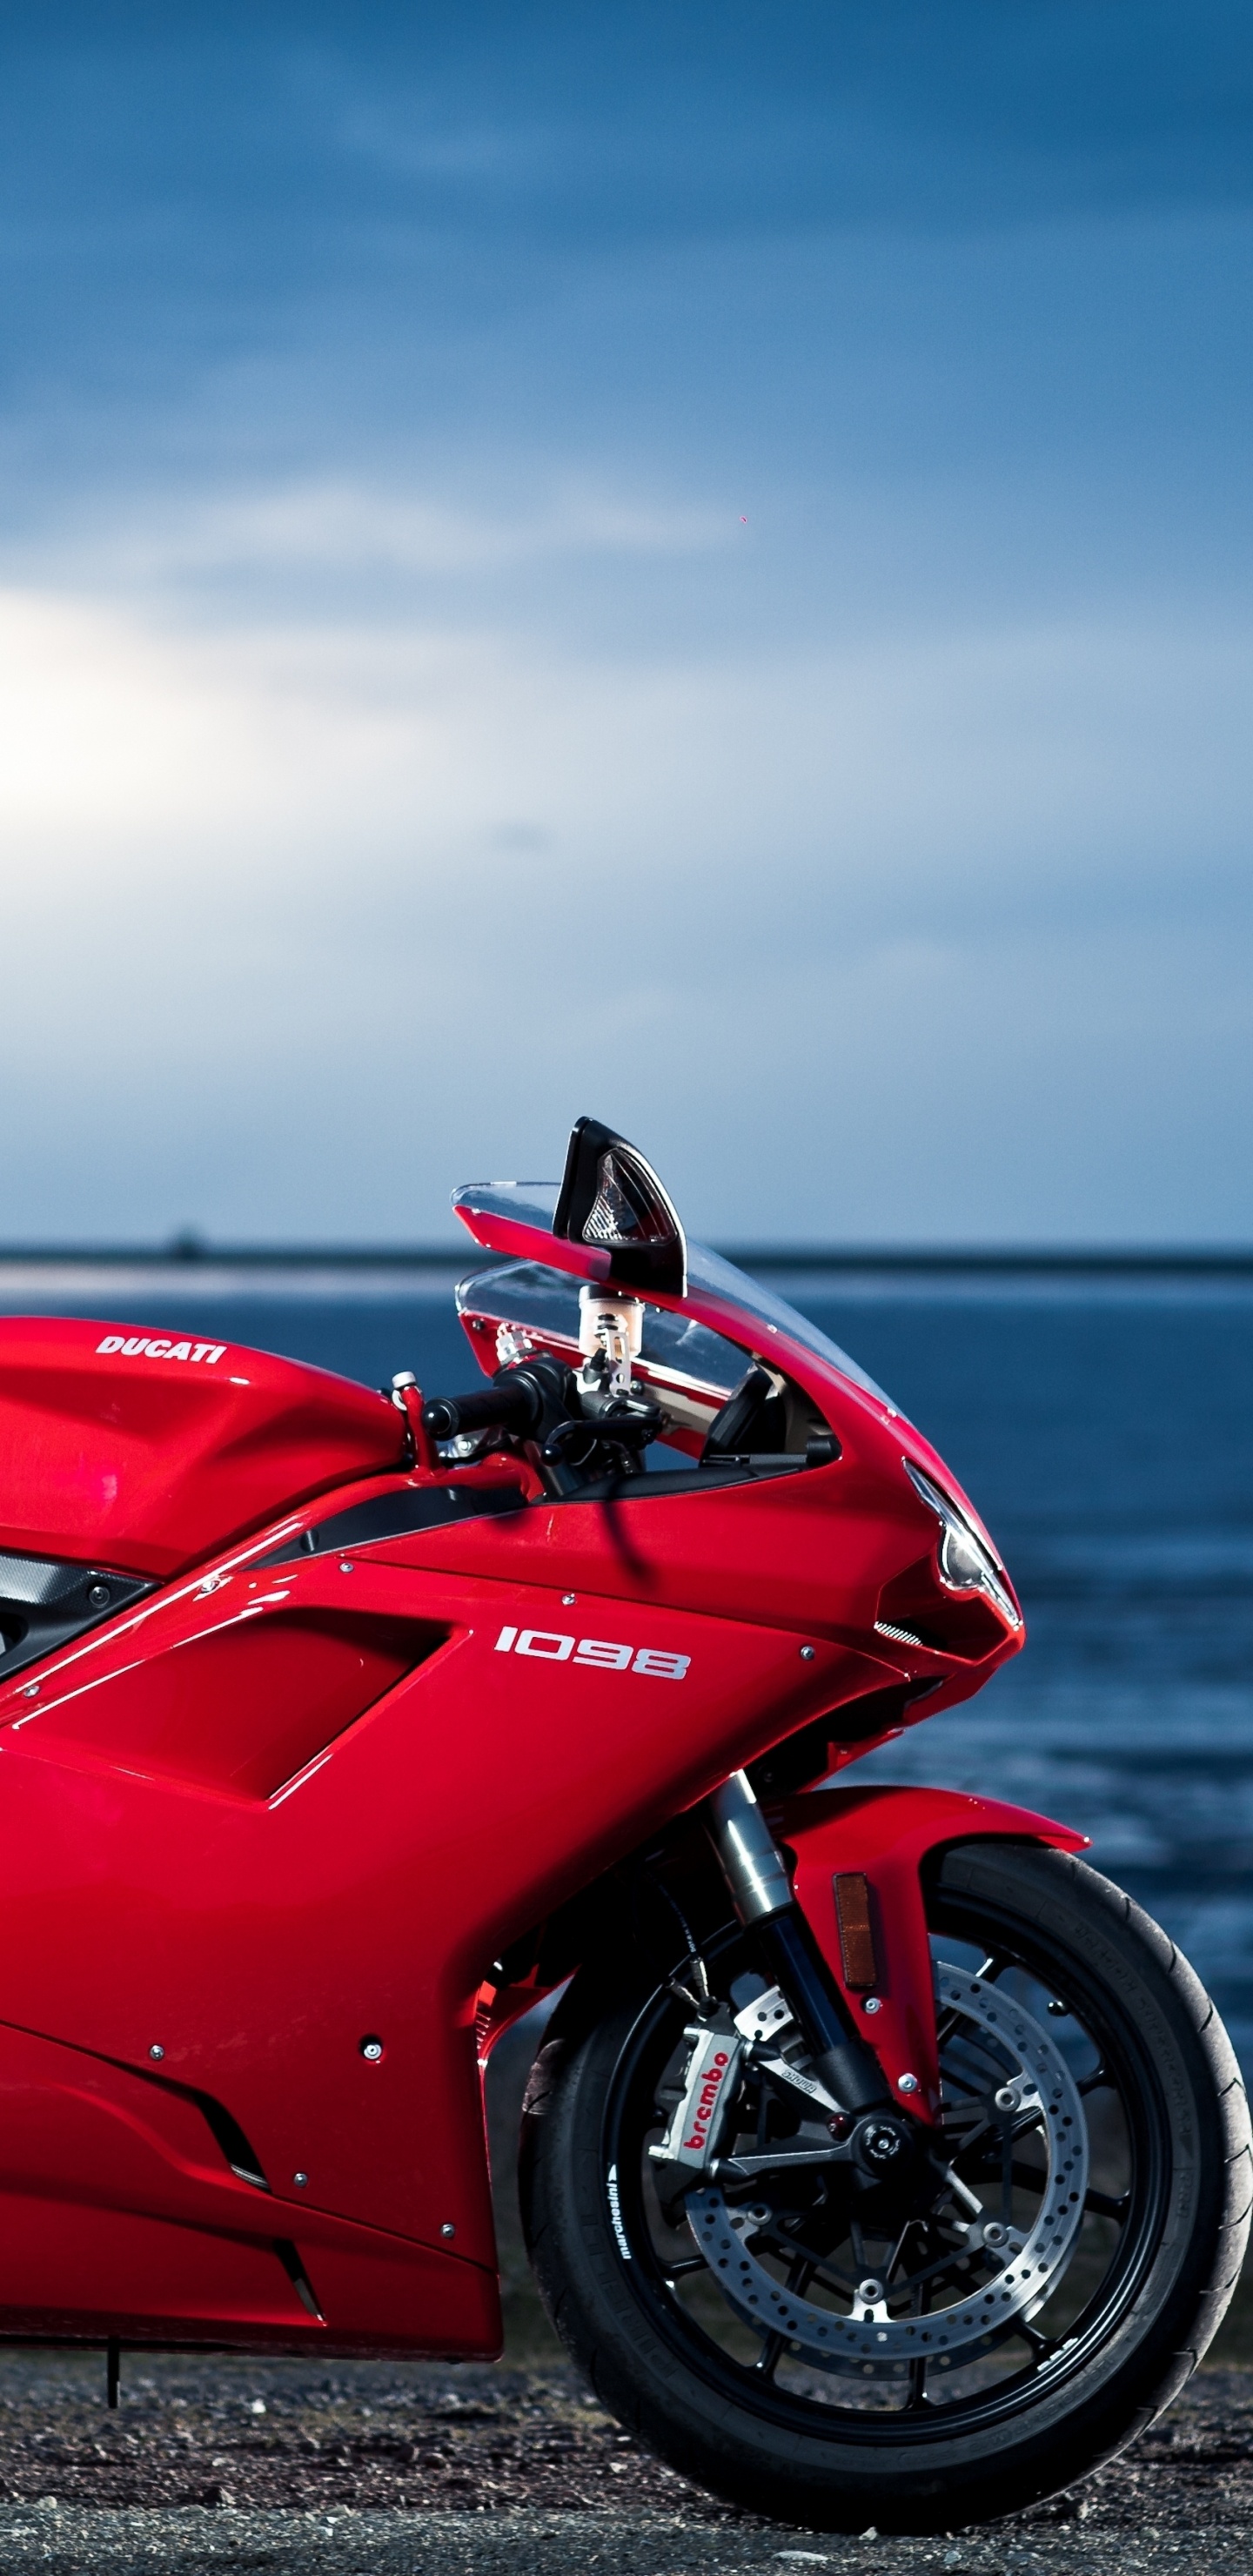 Red and Black Sports Bike on Seashore During Daytime. Wallpaper in 1440x2960 Resolution